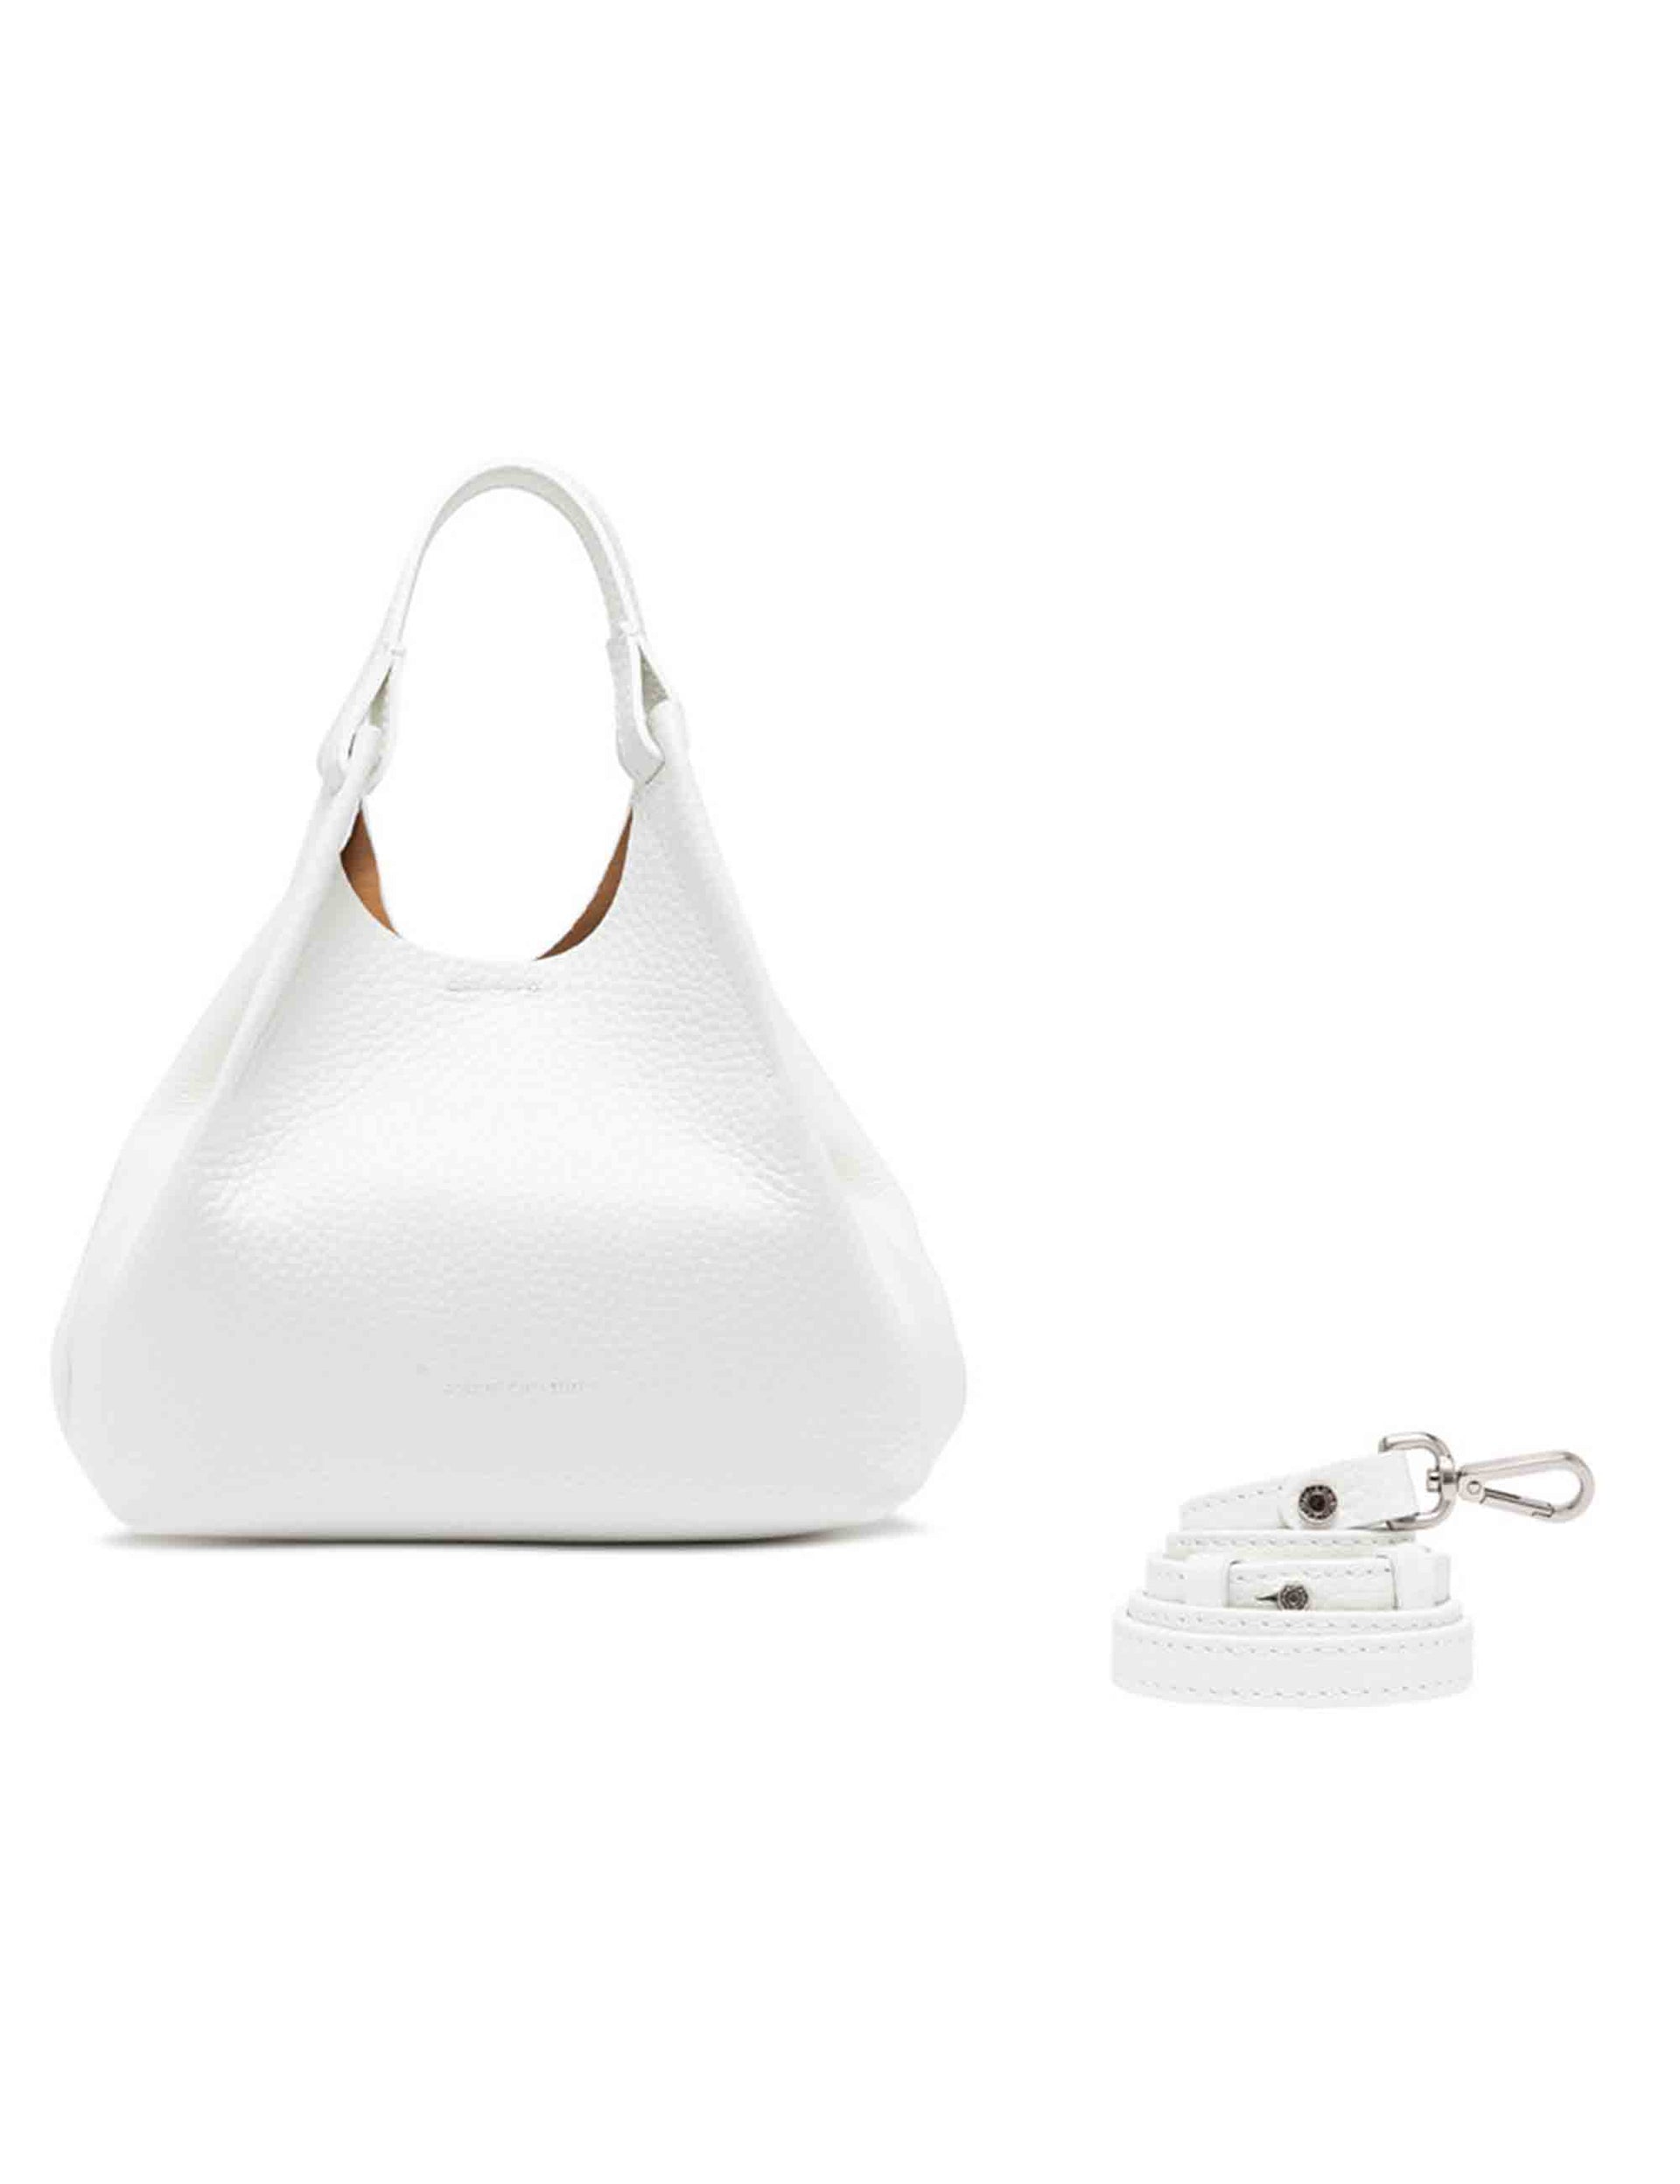 Dua women's shoulder bag in white leather with matching shoulder strap